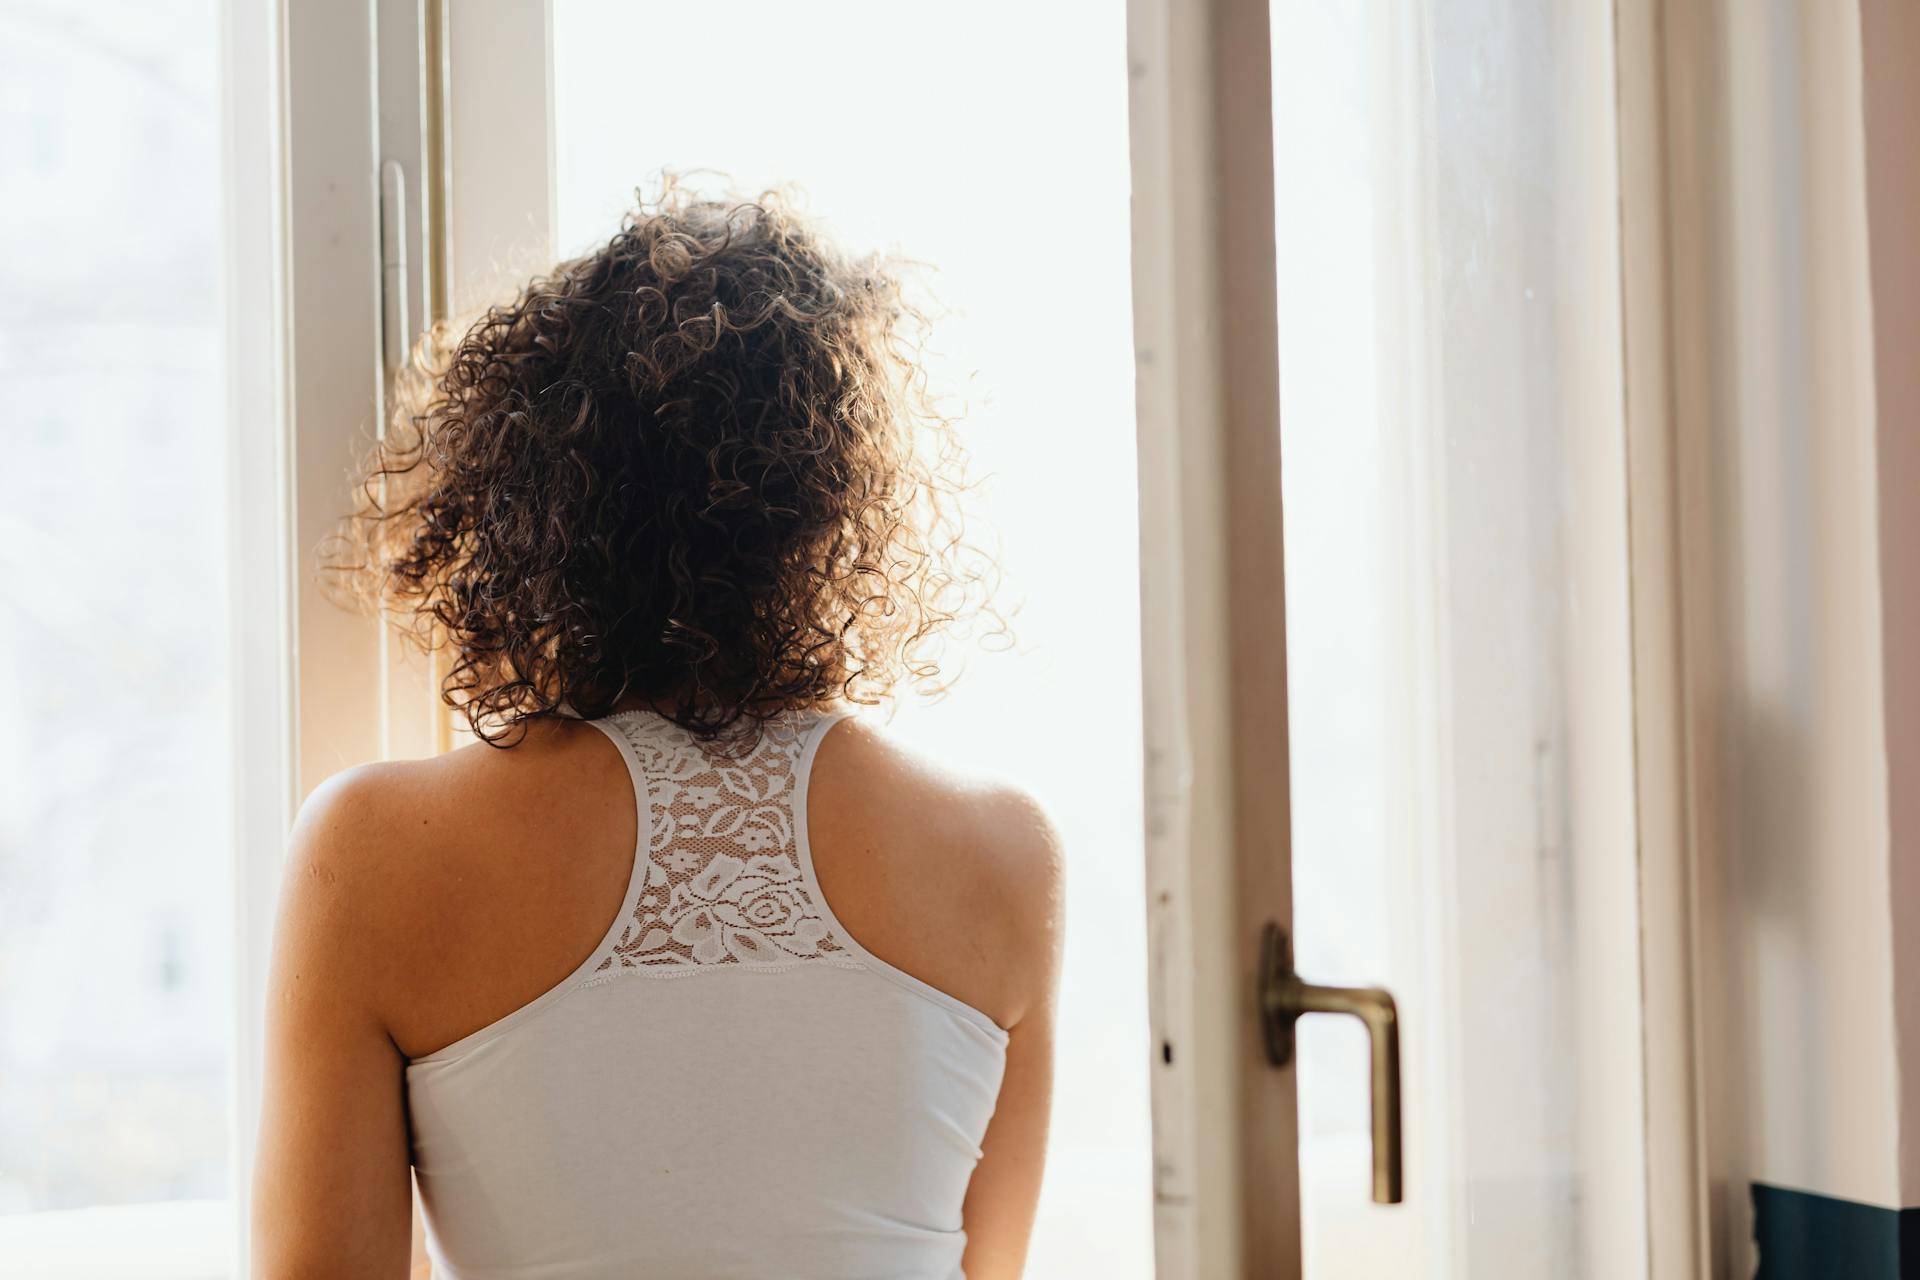 Woman standing near window with her eyes closed | Source: Pexels